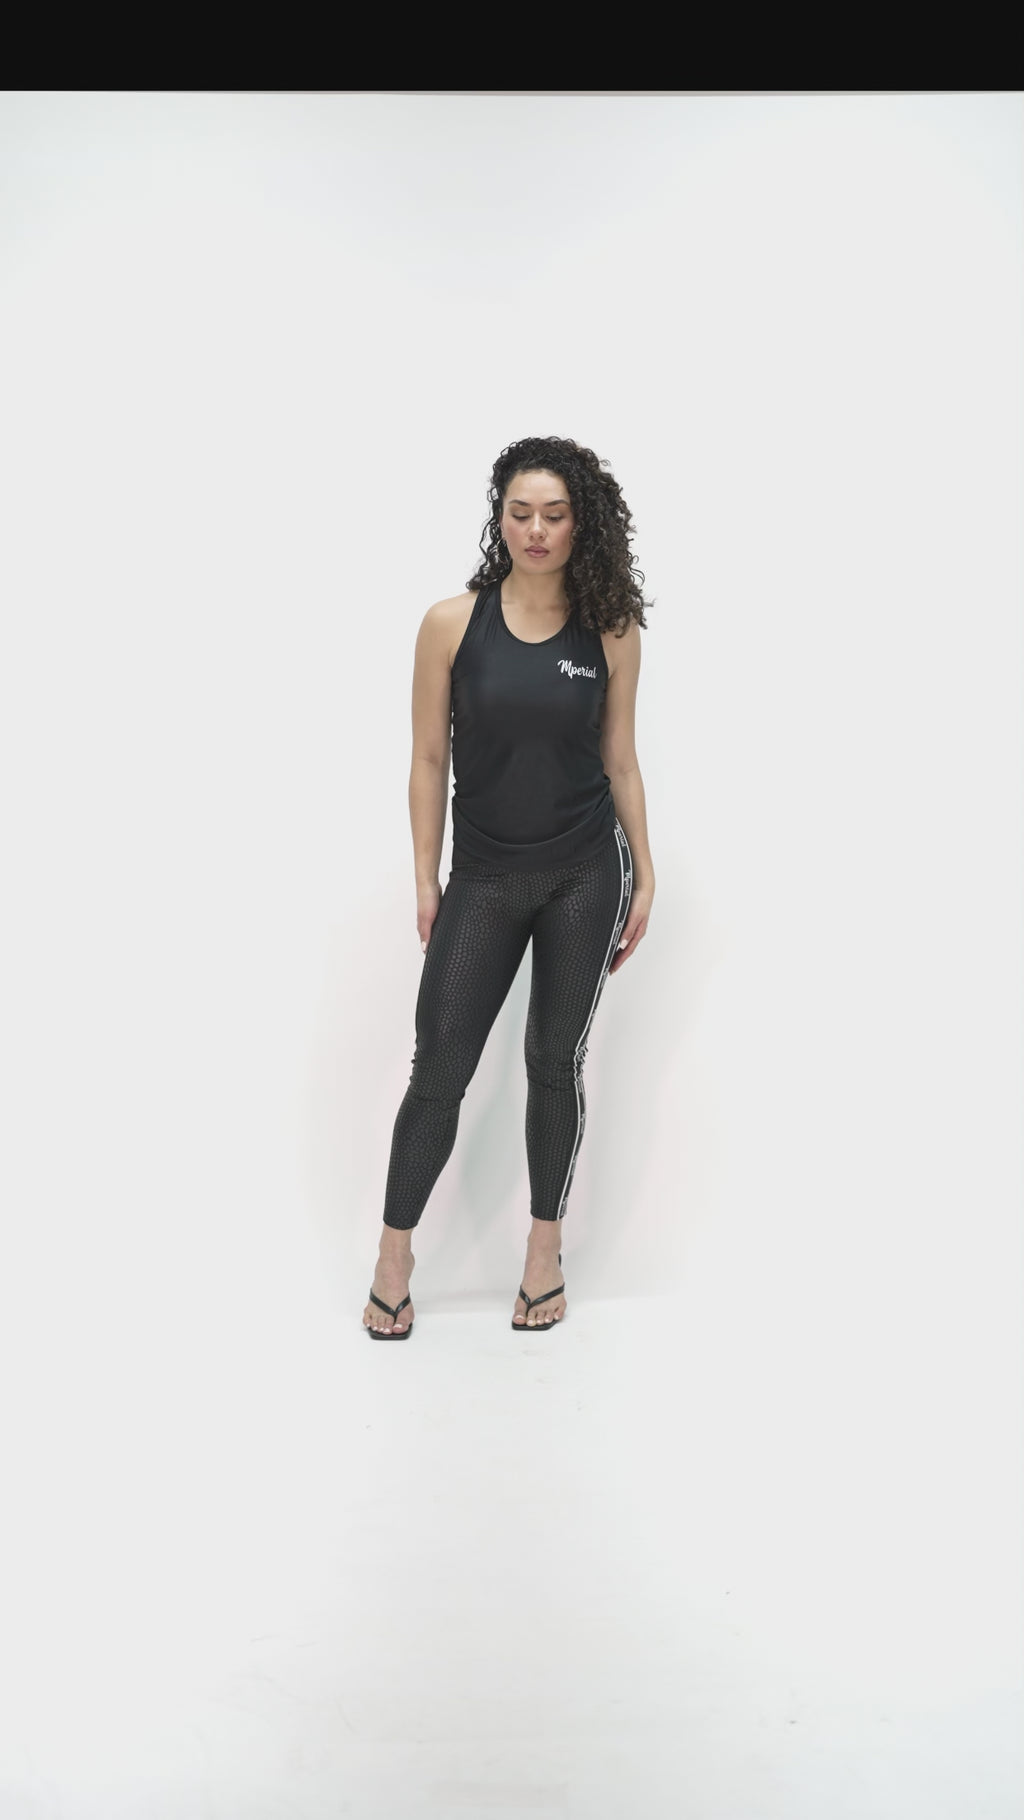 Model is 5'7 150lbs wearing size small full length leggings and medium tops